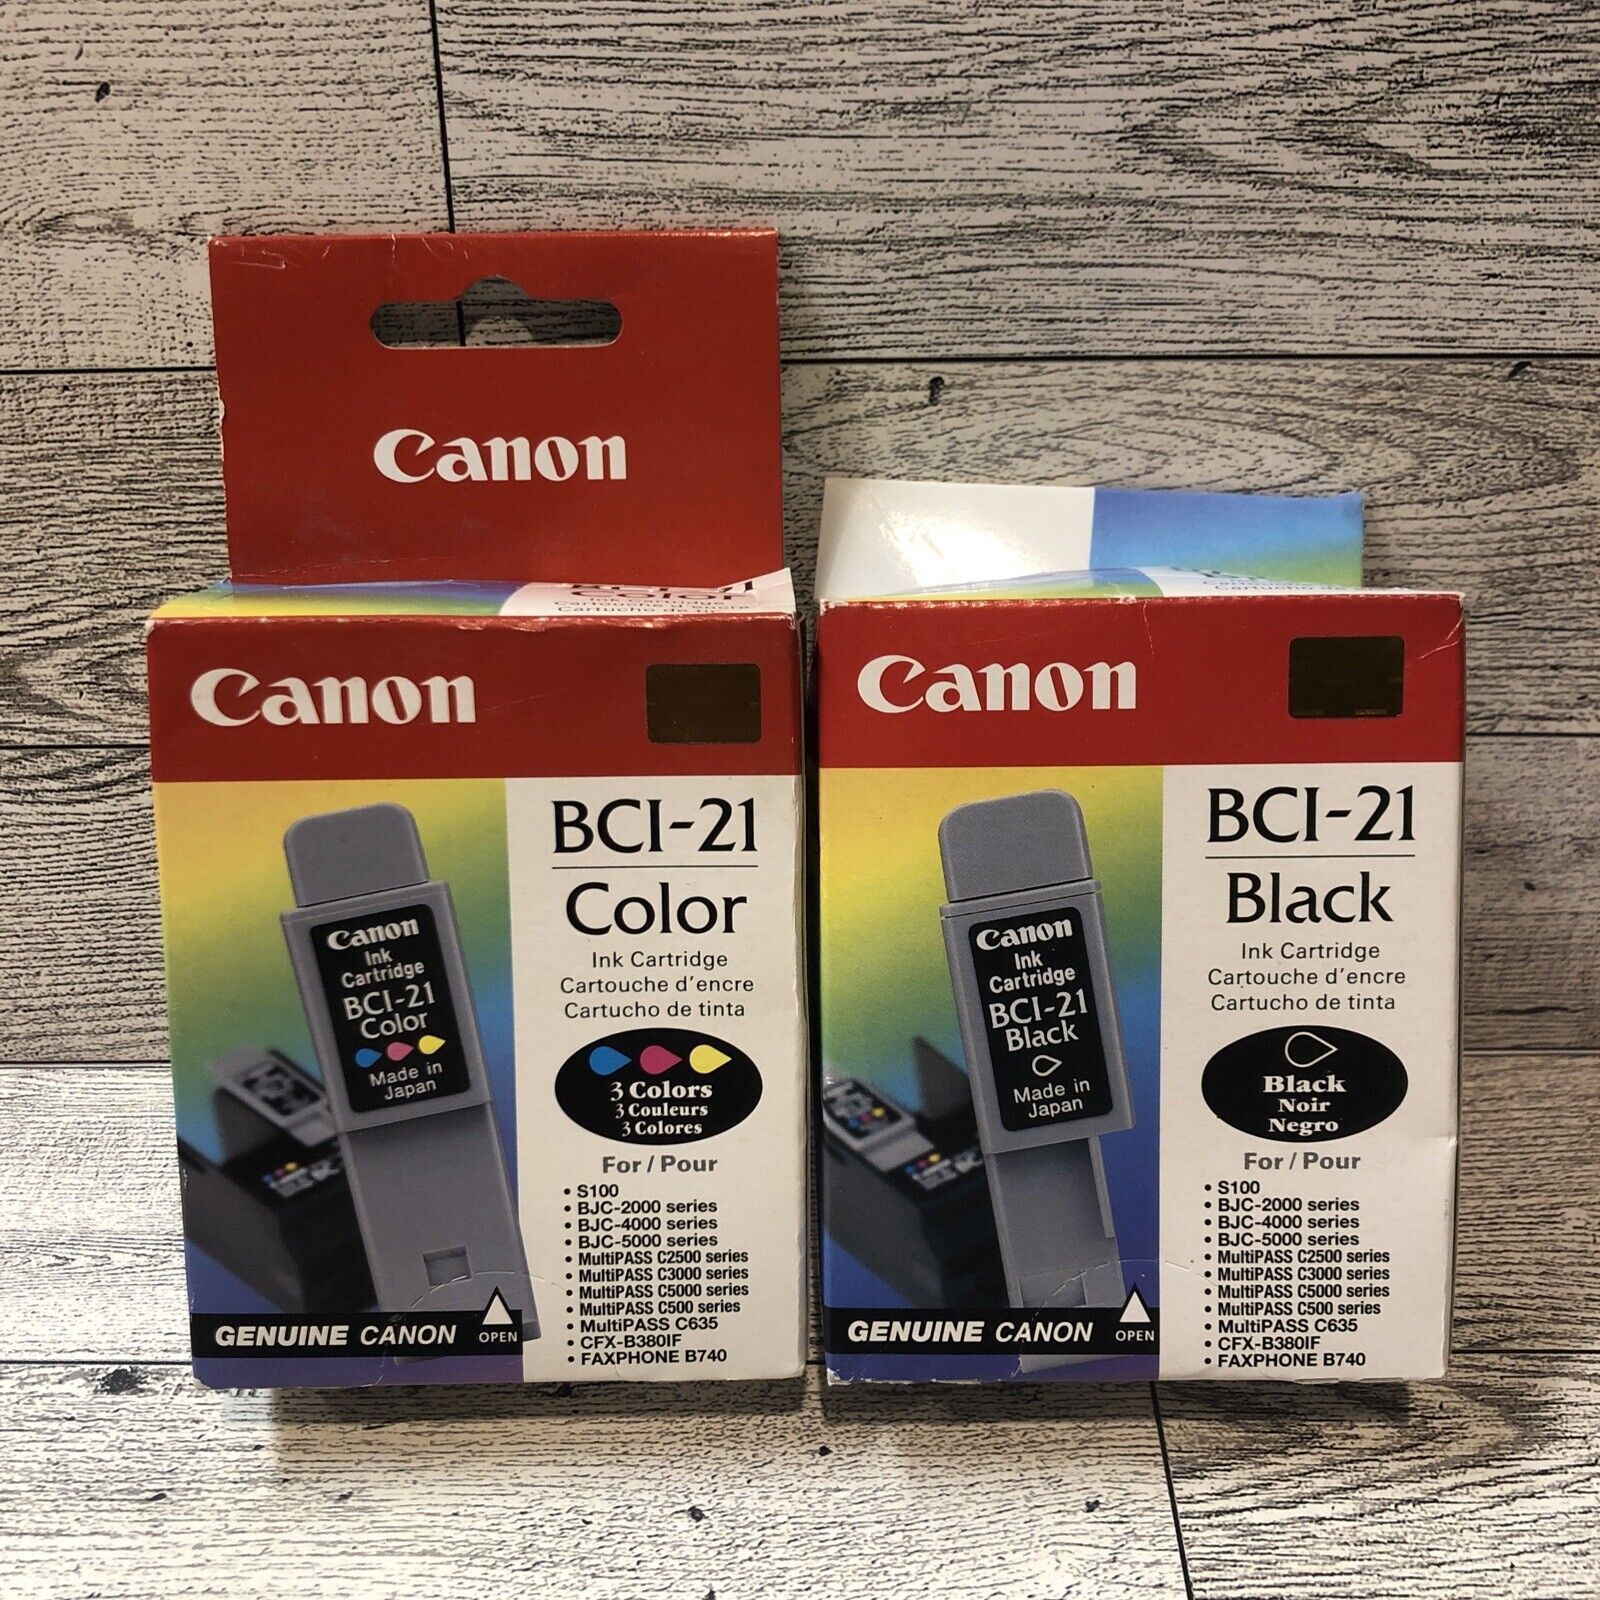 CANON BCI-21 Tri-Color & Black Ink Cartridge Factory Sealed